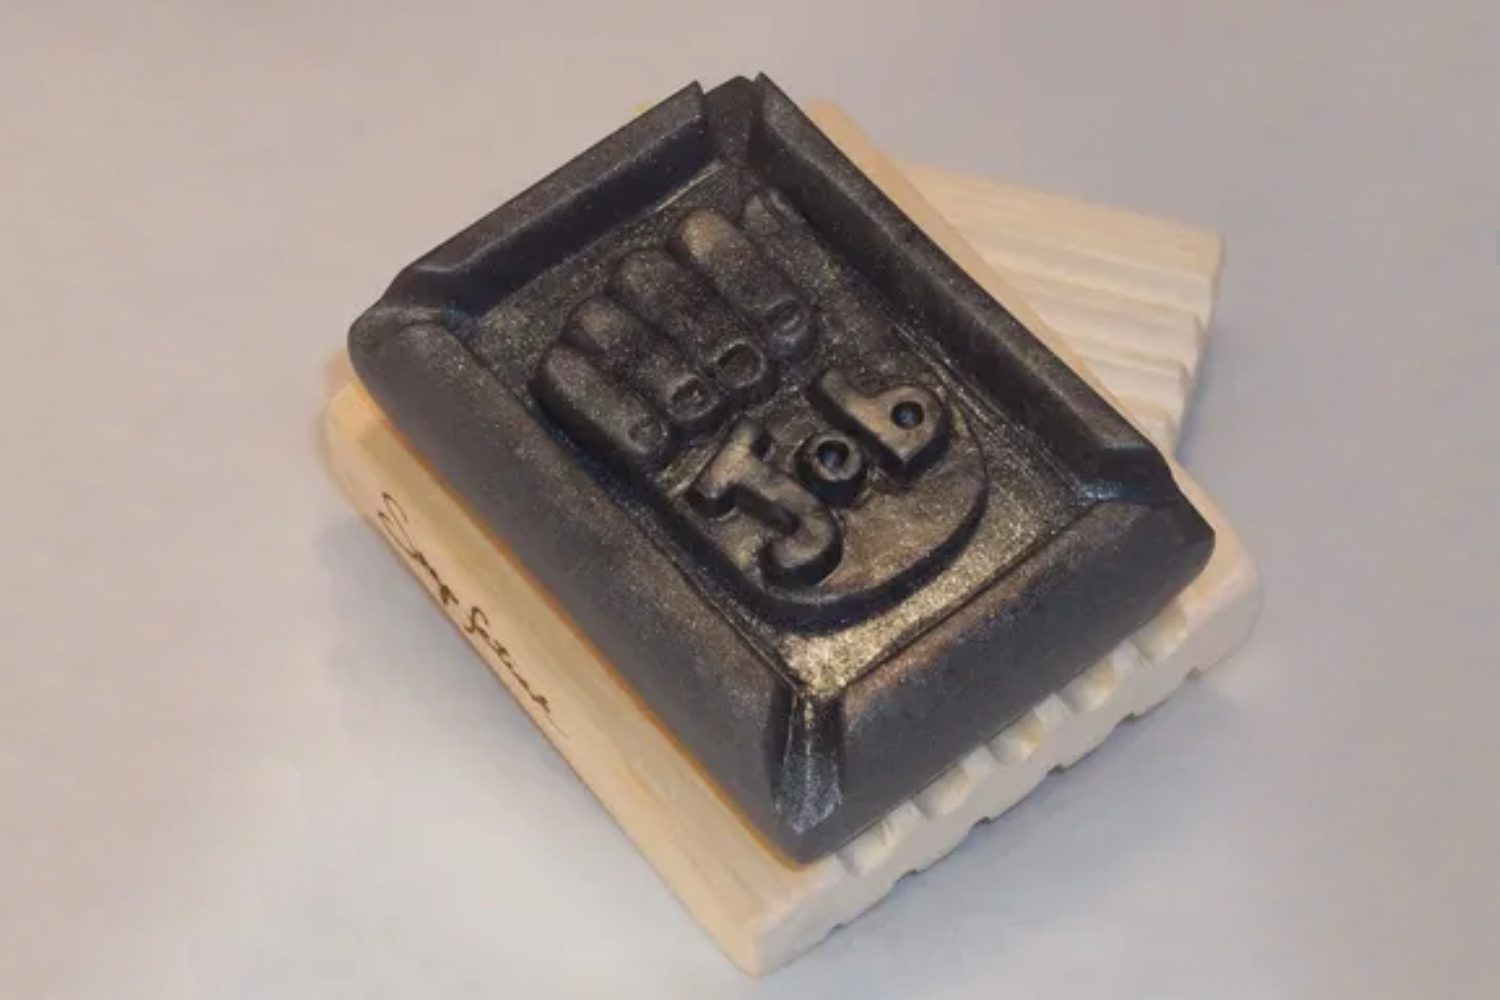 A soap stamp with the number 3 5 on it.